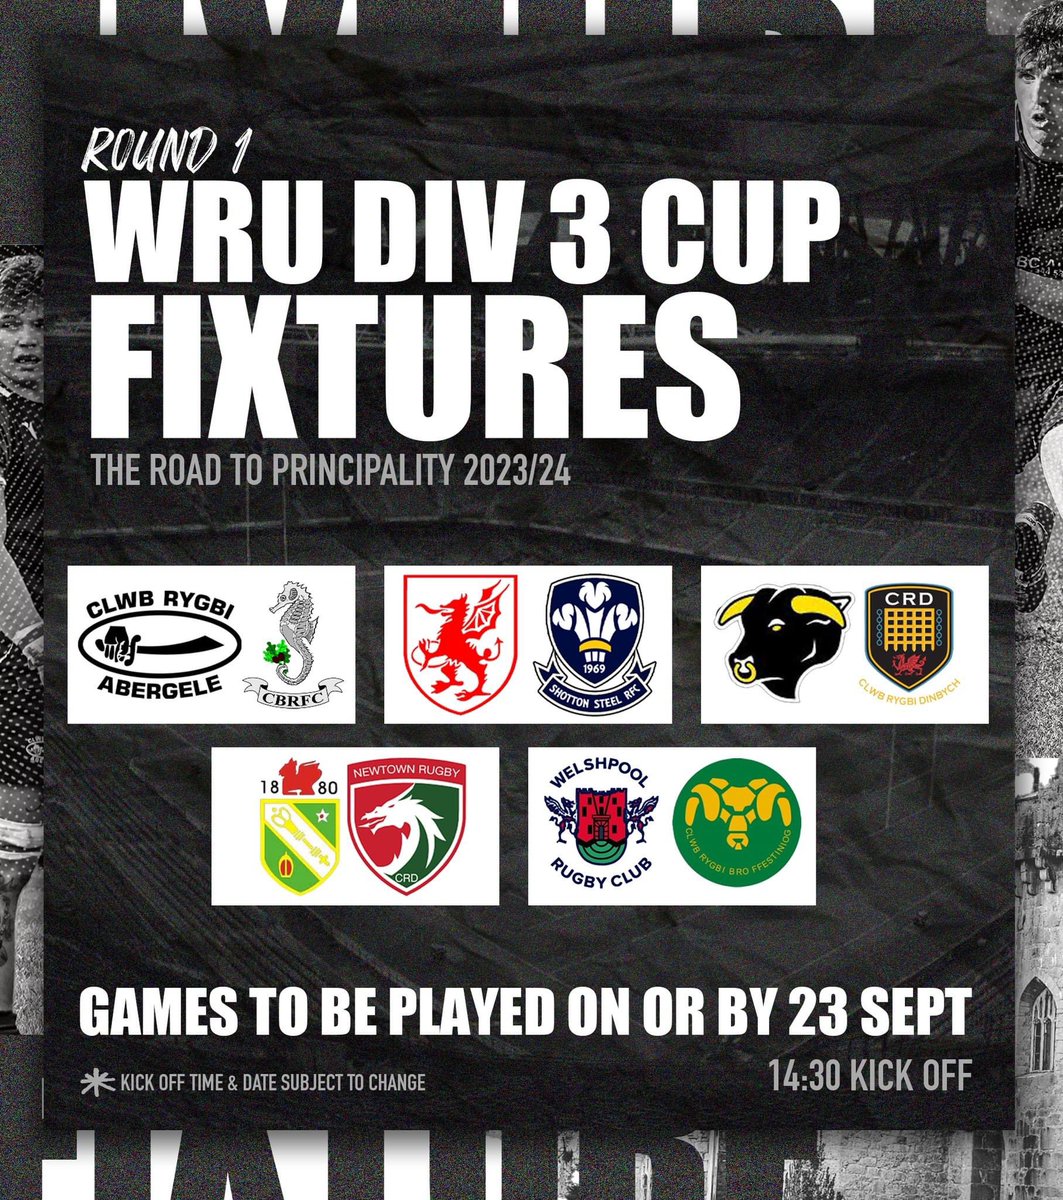 WRU DIV 3 CUP ROUND 1 DRAW 🚨

Now it wouldn't be a cup draw without us playing the Seahorses, would it?? Some tasty fixtures here. 

Good luck to all teams involved! 

#wearegele